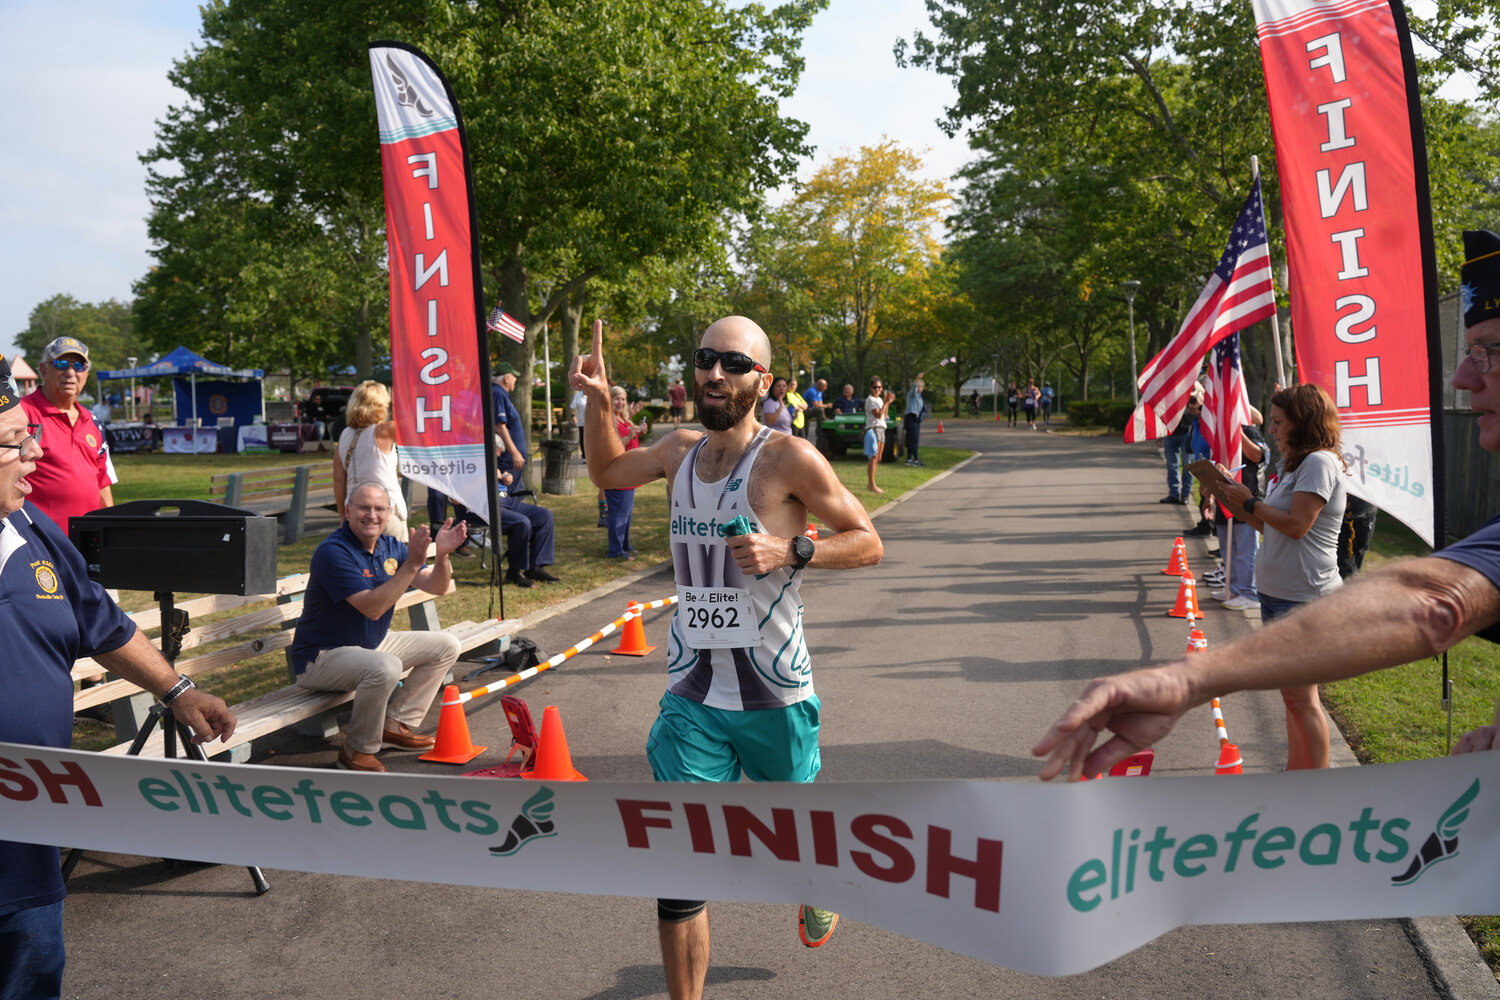 Keith Masso of Glen Cove finishes the 'Run for Heroes' 5k race as the first-place male winner.